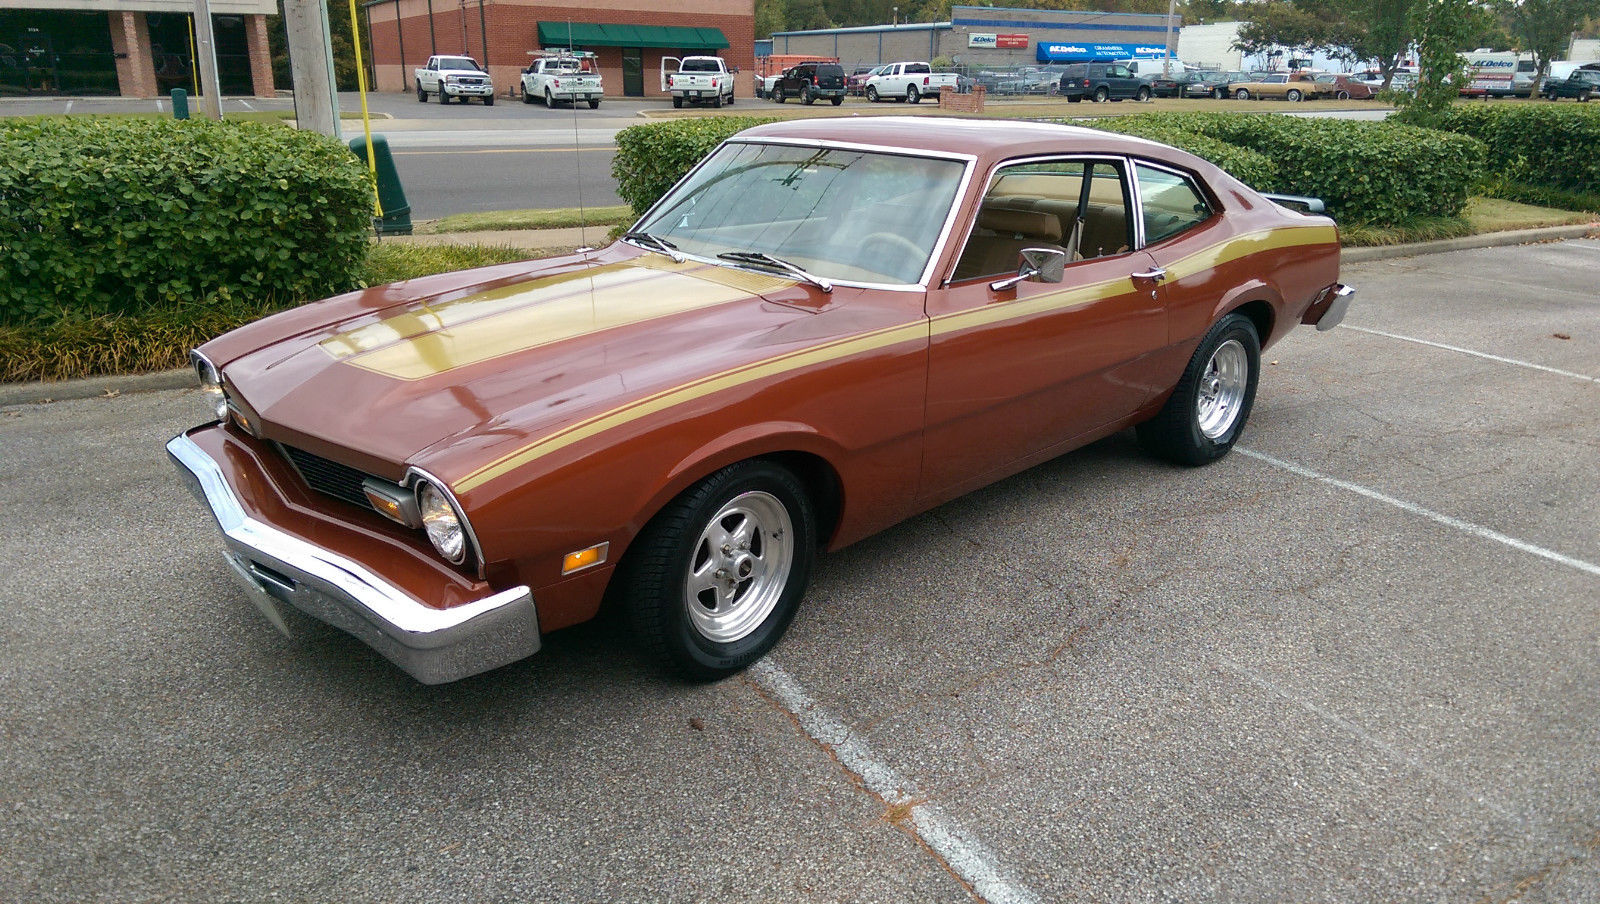 Check Out This Sleeper Ford Maverick! 302, Four-On-The-Floor, And A Nice Shade Of Seventies’ Brown!